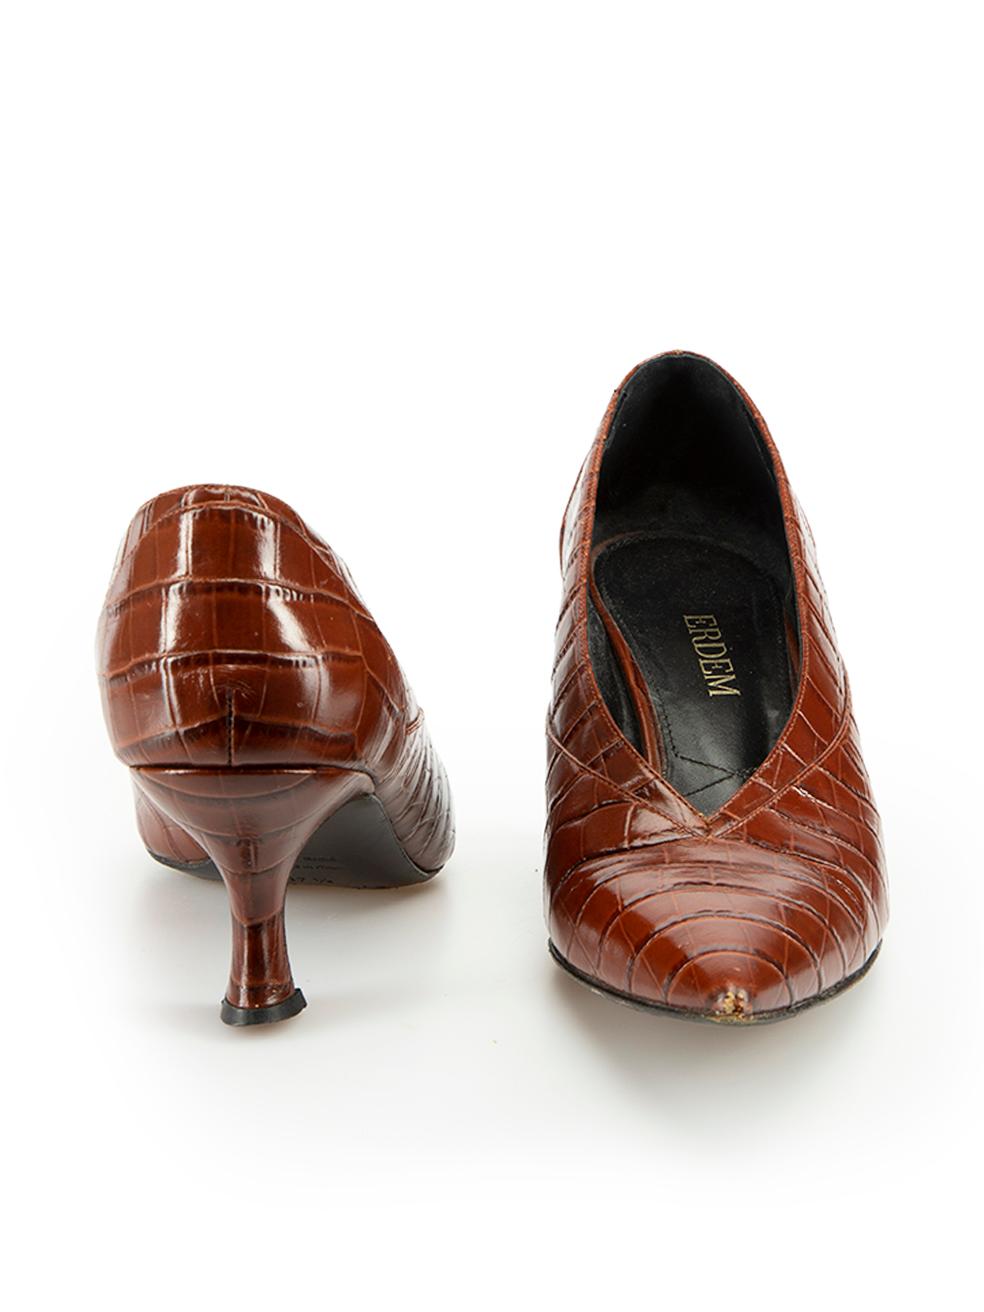 Erdem Brown Leather Croc Embossed Heels Size IT 37.5 In Good Condition For Sale In London, GB